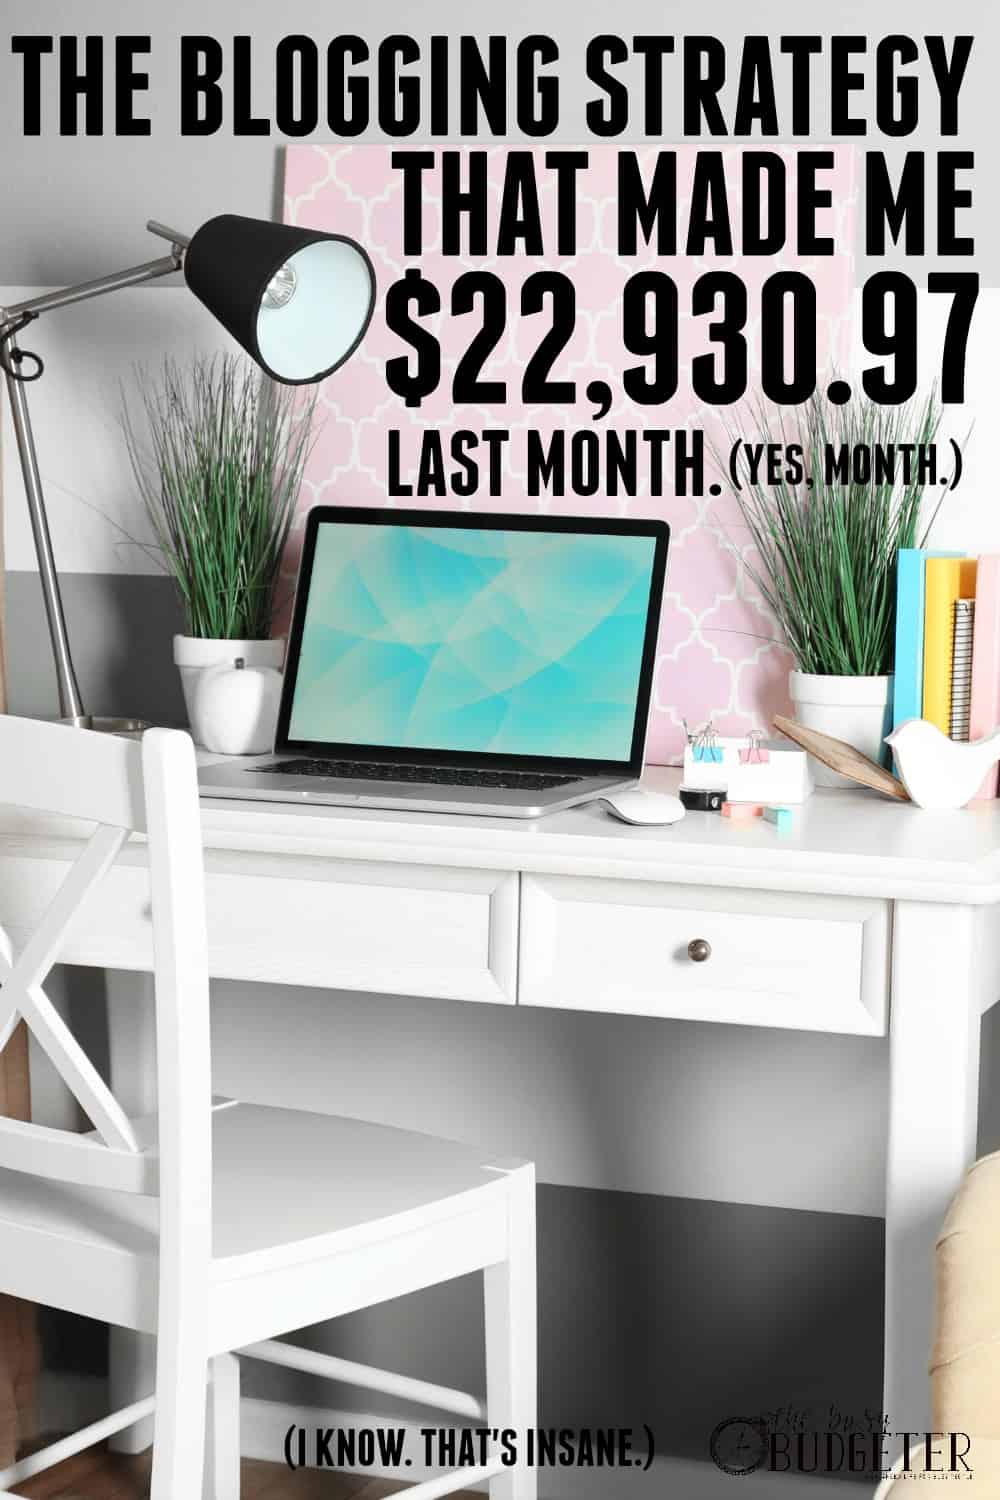 May 2016 Income Report Blogging. I absolutely love reading her income reports! She just gives out so much informationf or free and clearly explains what she does to make money from blogging. I've been following her since she was TINY and to see her growth has been mesmerizing. 